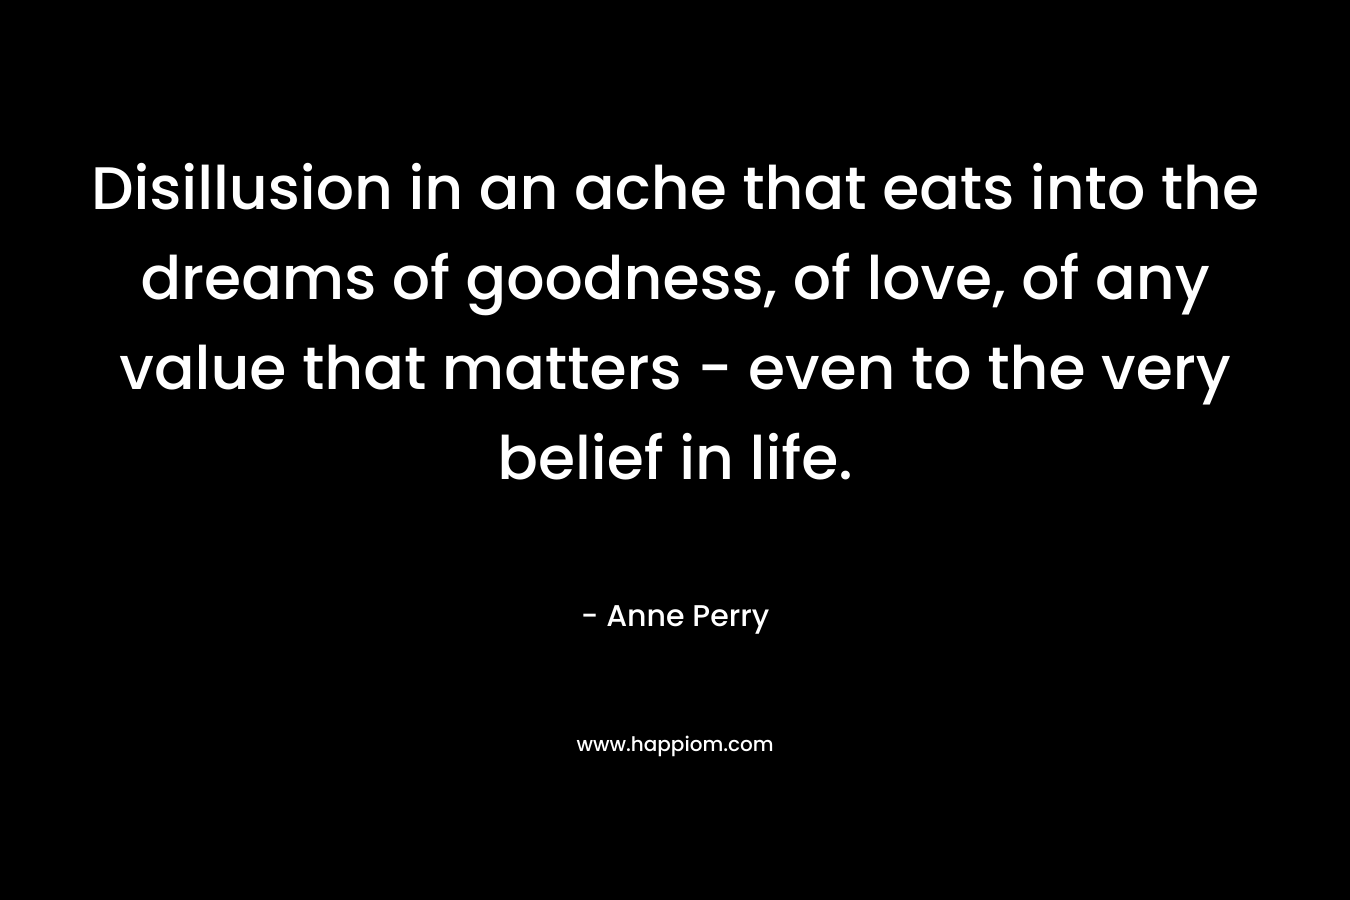 Disillusion in an ache that eats into the dreams of goodness, of love, of any value that matters - even to the very belief in life.